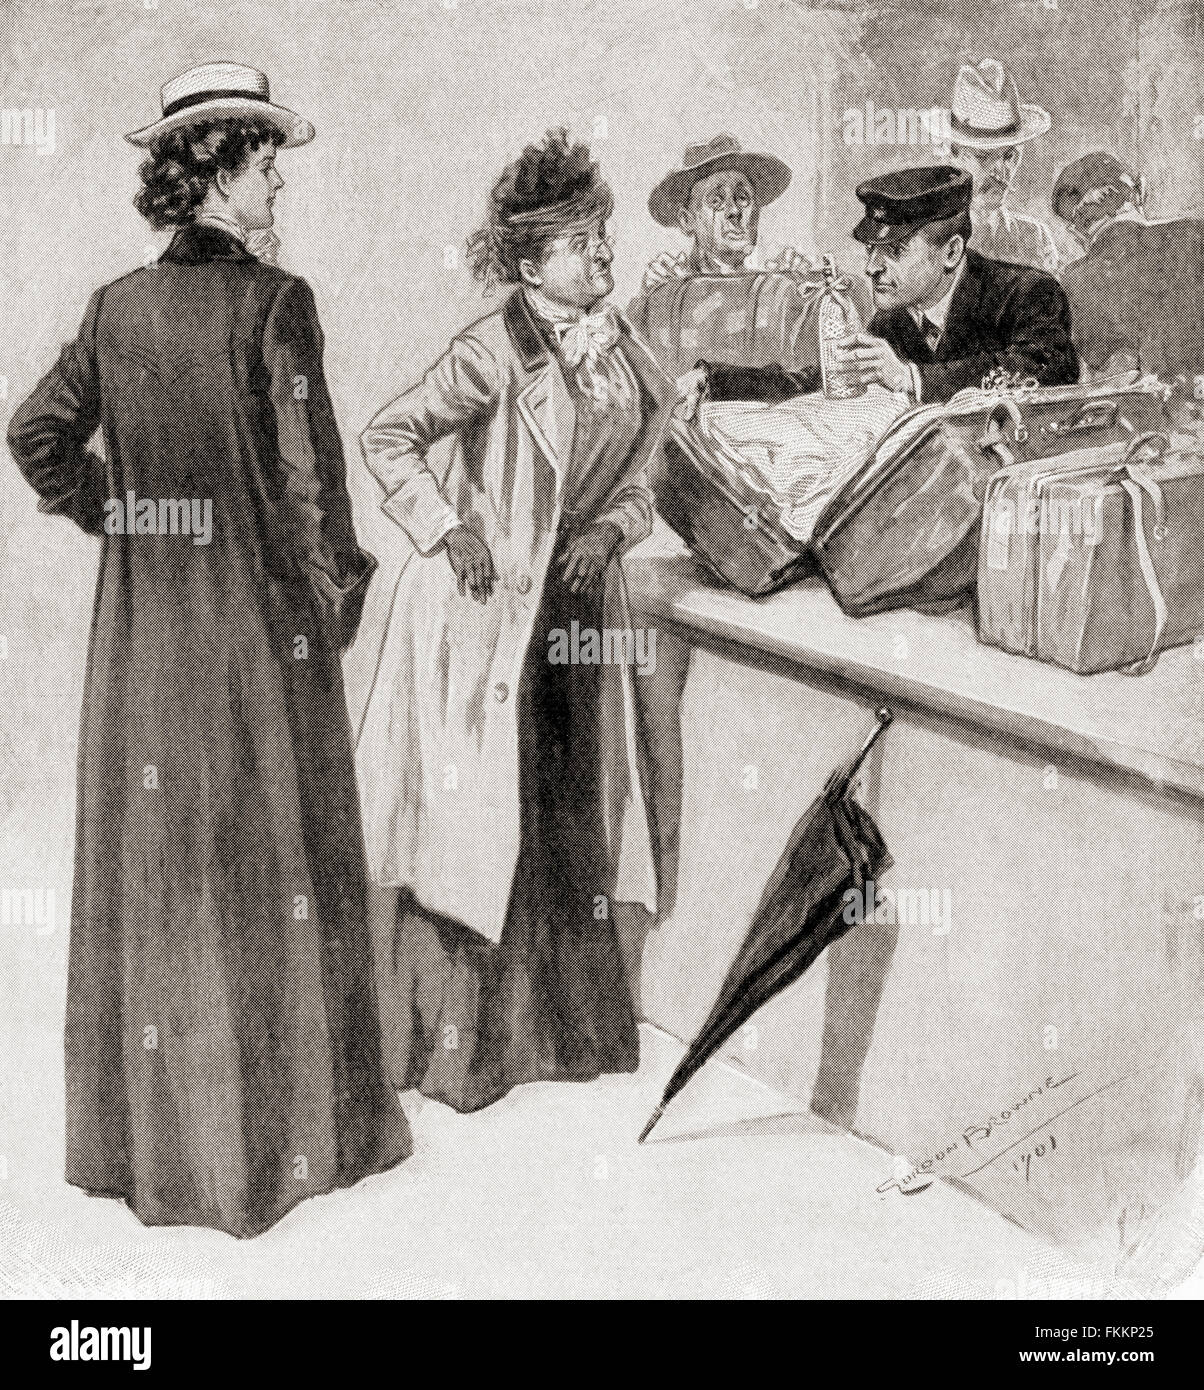 Passengers caught trying to pass illegal goods through the Custom House, London, England in the late 19th century.  From Living London, published c.1901. Stock Photo